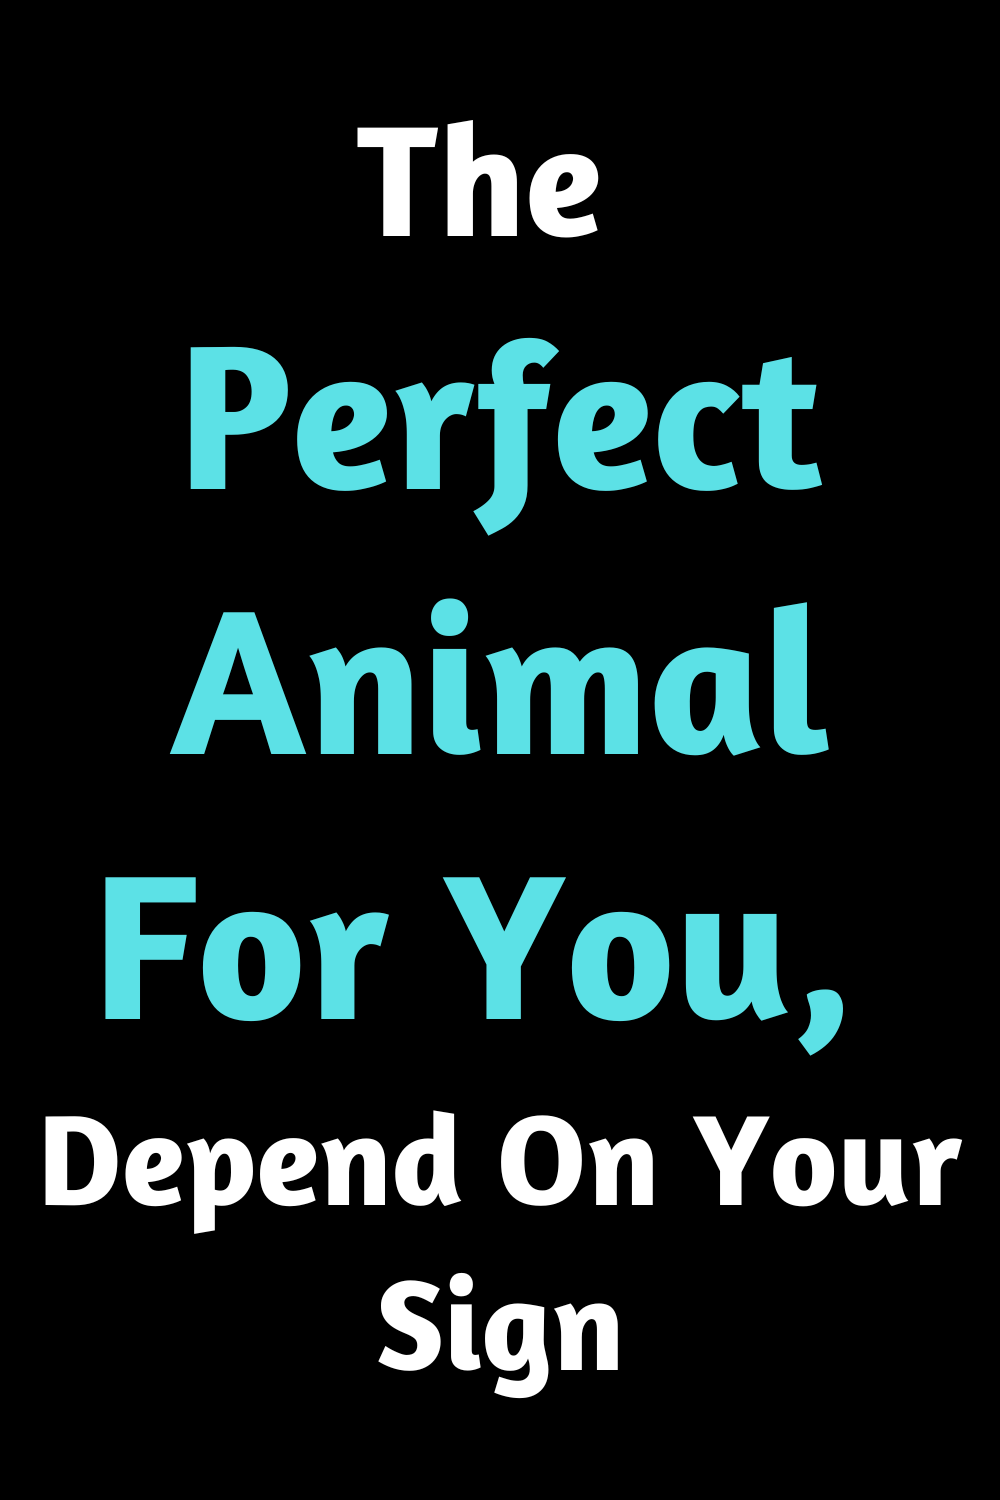 The Perfect Animal For You, Depend On Your Sign